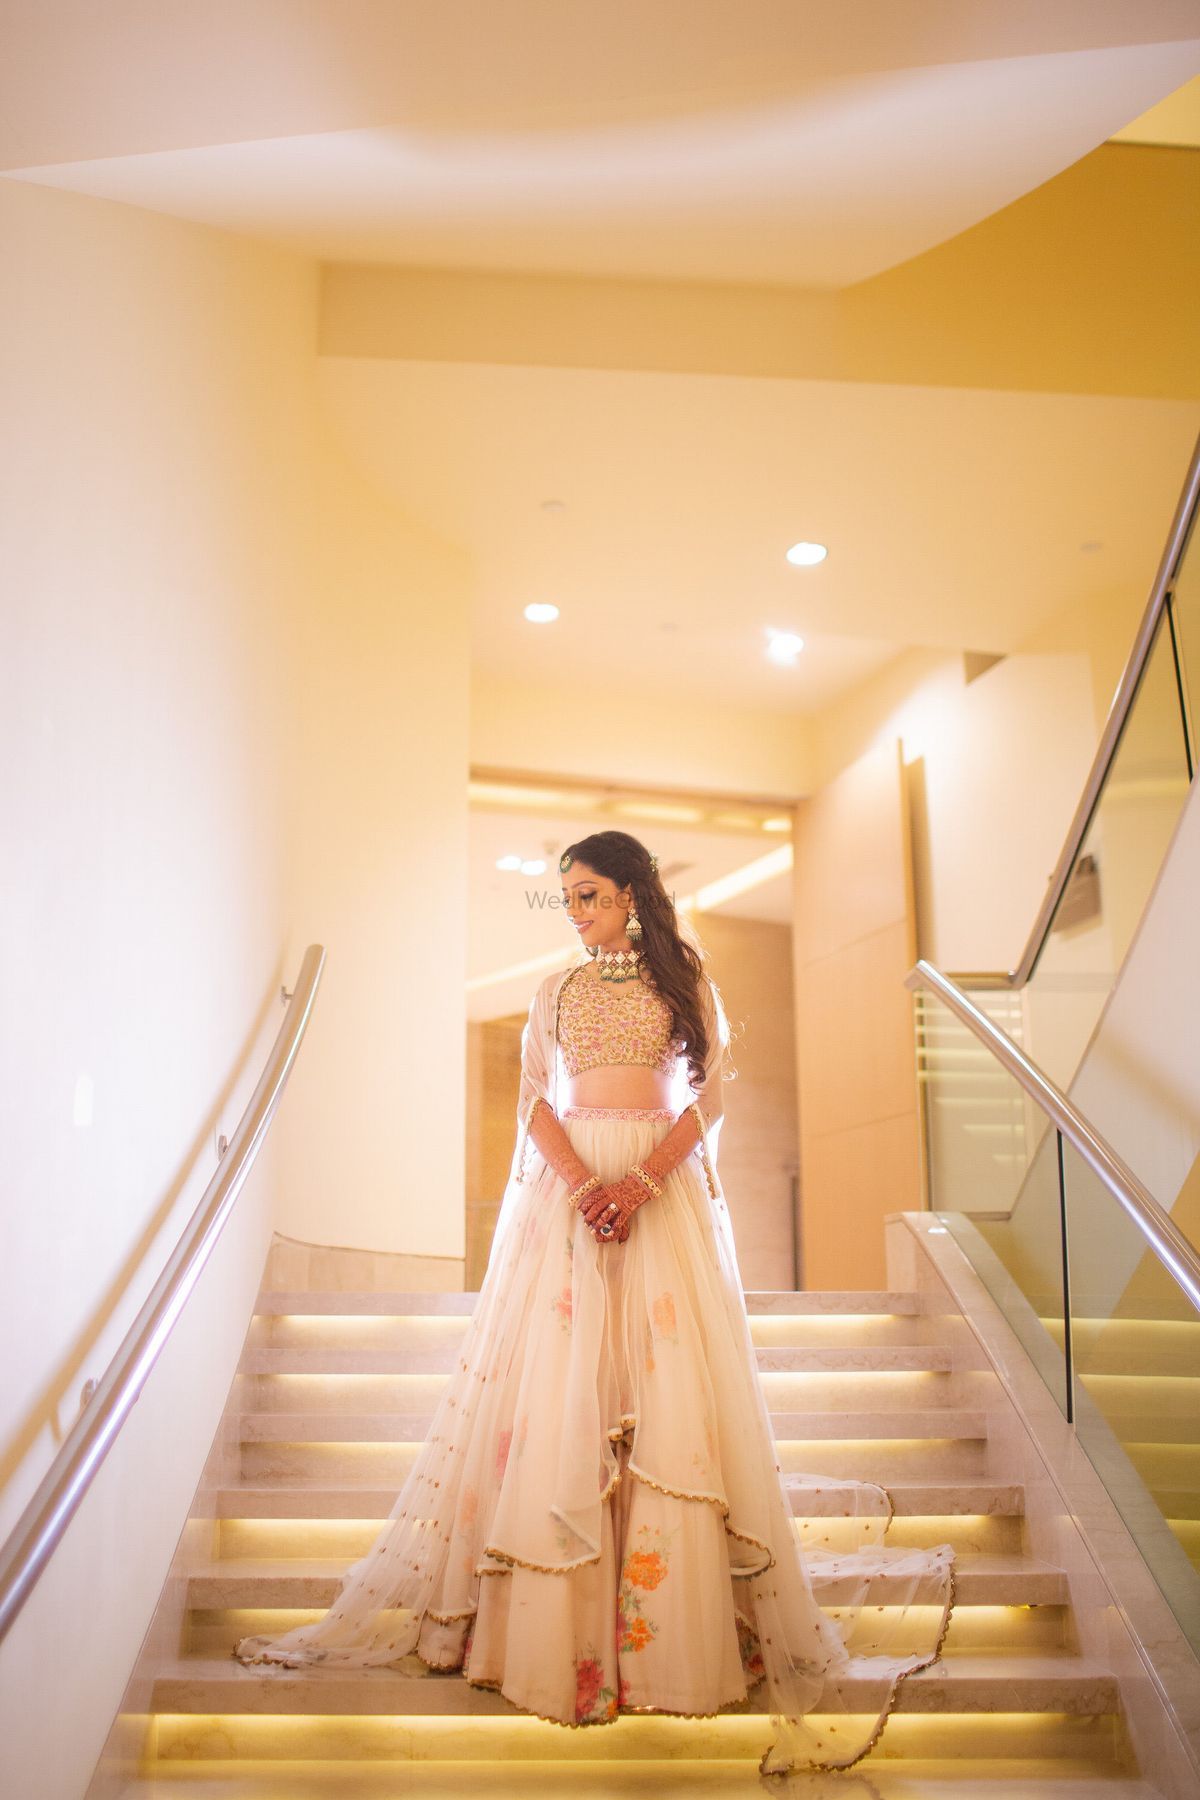 A Gorgeous Mumbai Wedding With A Bride In Stunning Outfits | WedMeGood